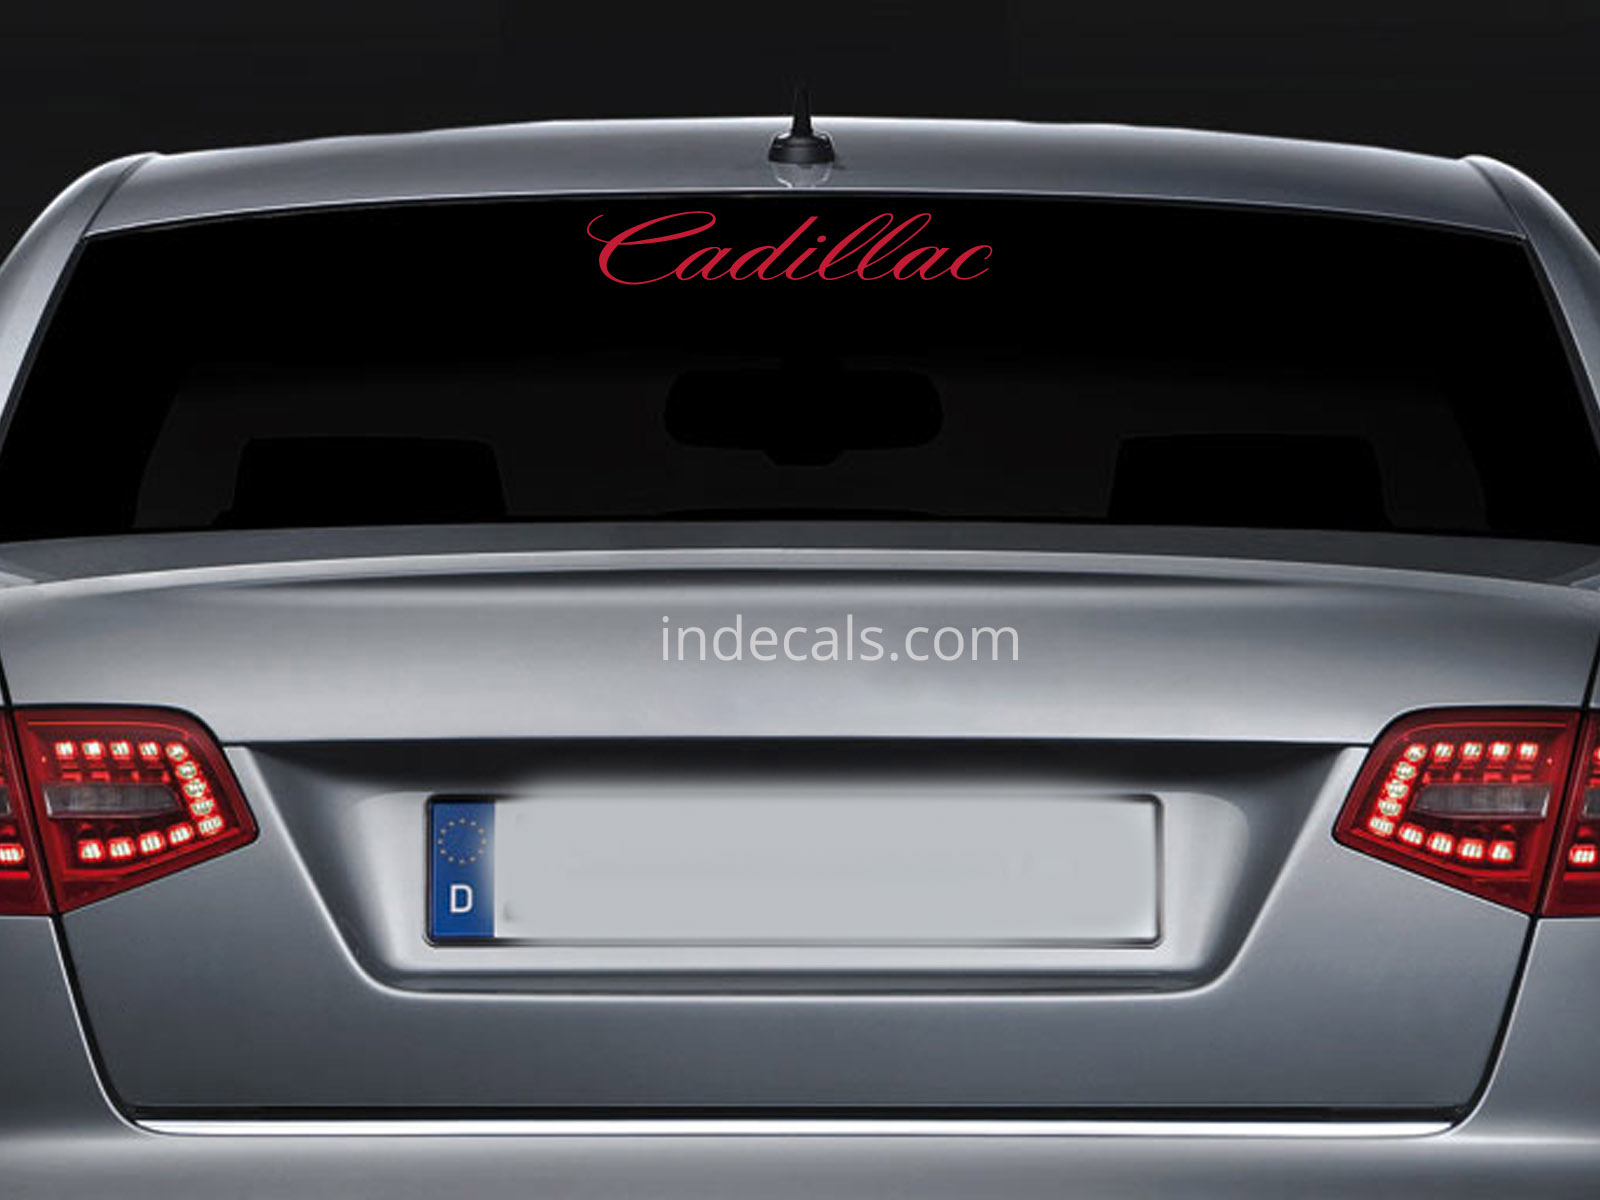 1 x Cadillac Sticker for Windshield or Back Window - Red